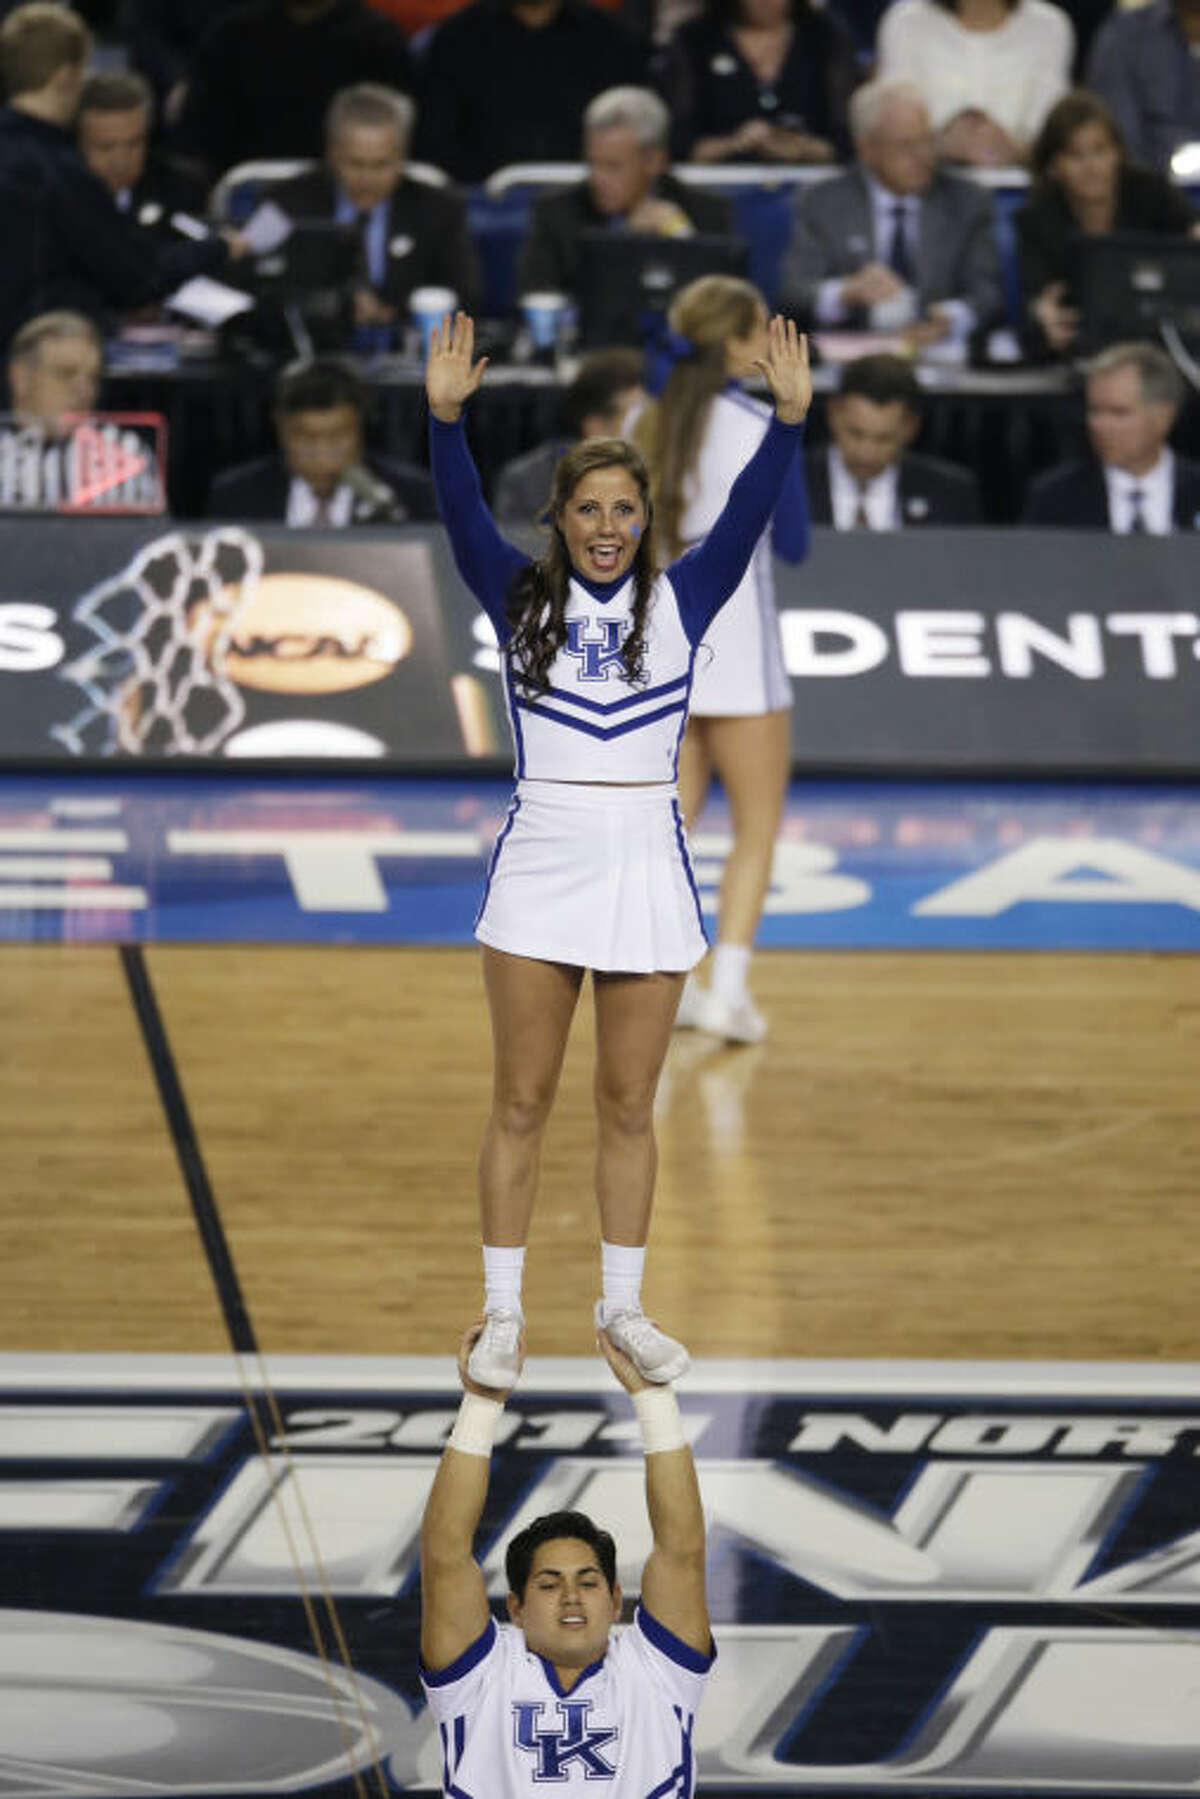 Kentucky cheerleaders perform during the first half of the NCAA Final Four tournament college basketball championship game against Connecticut Monday, April 7, 2014, in Arlington, Texas. (AP Photo/Tony Gutierrez)